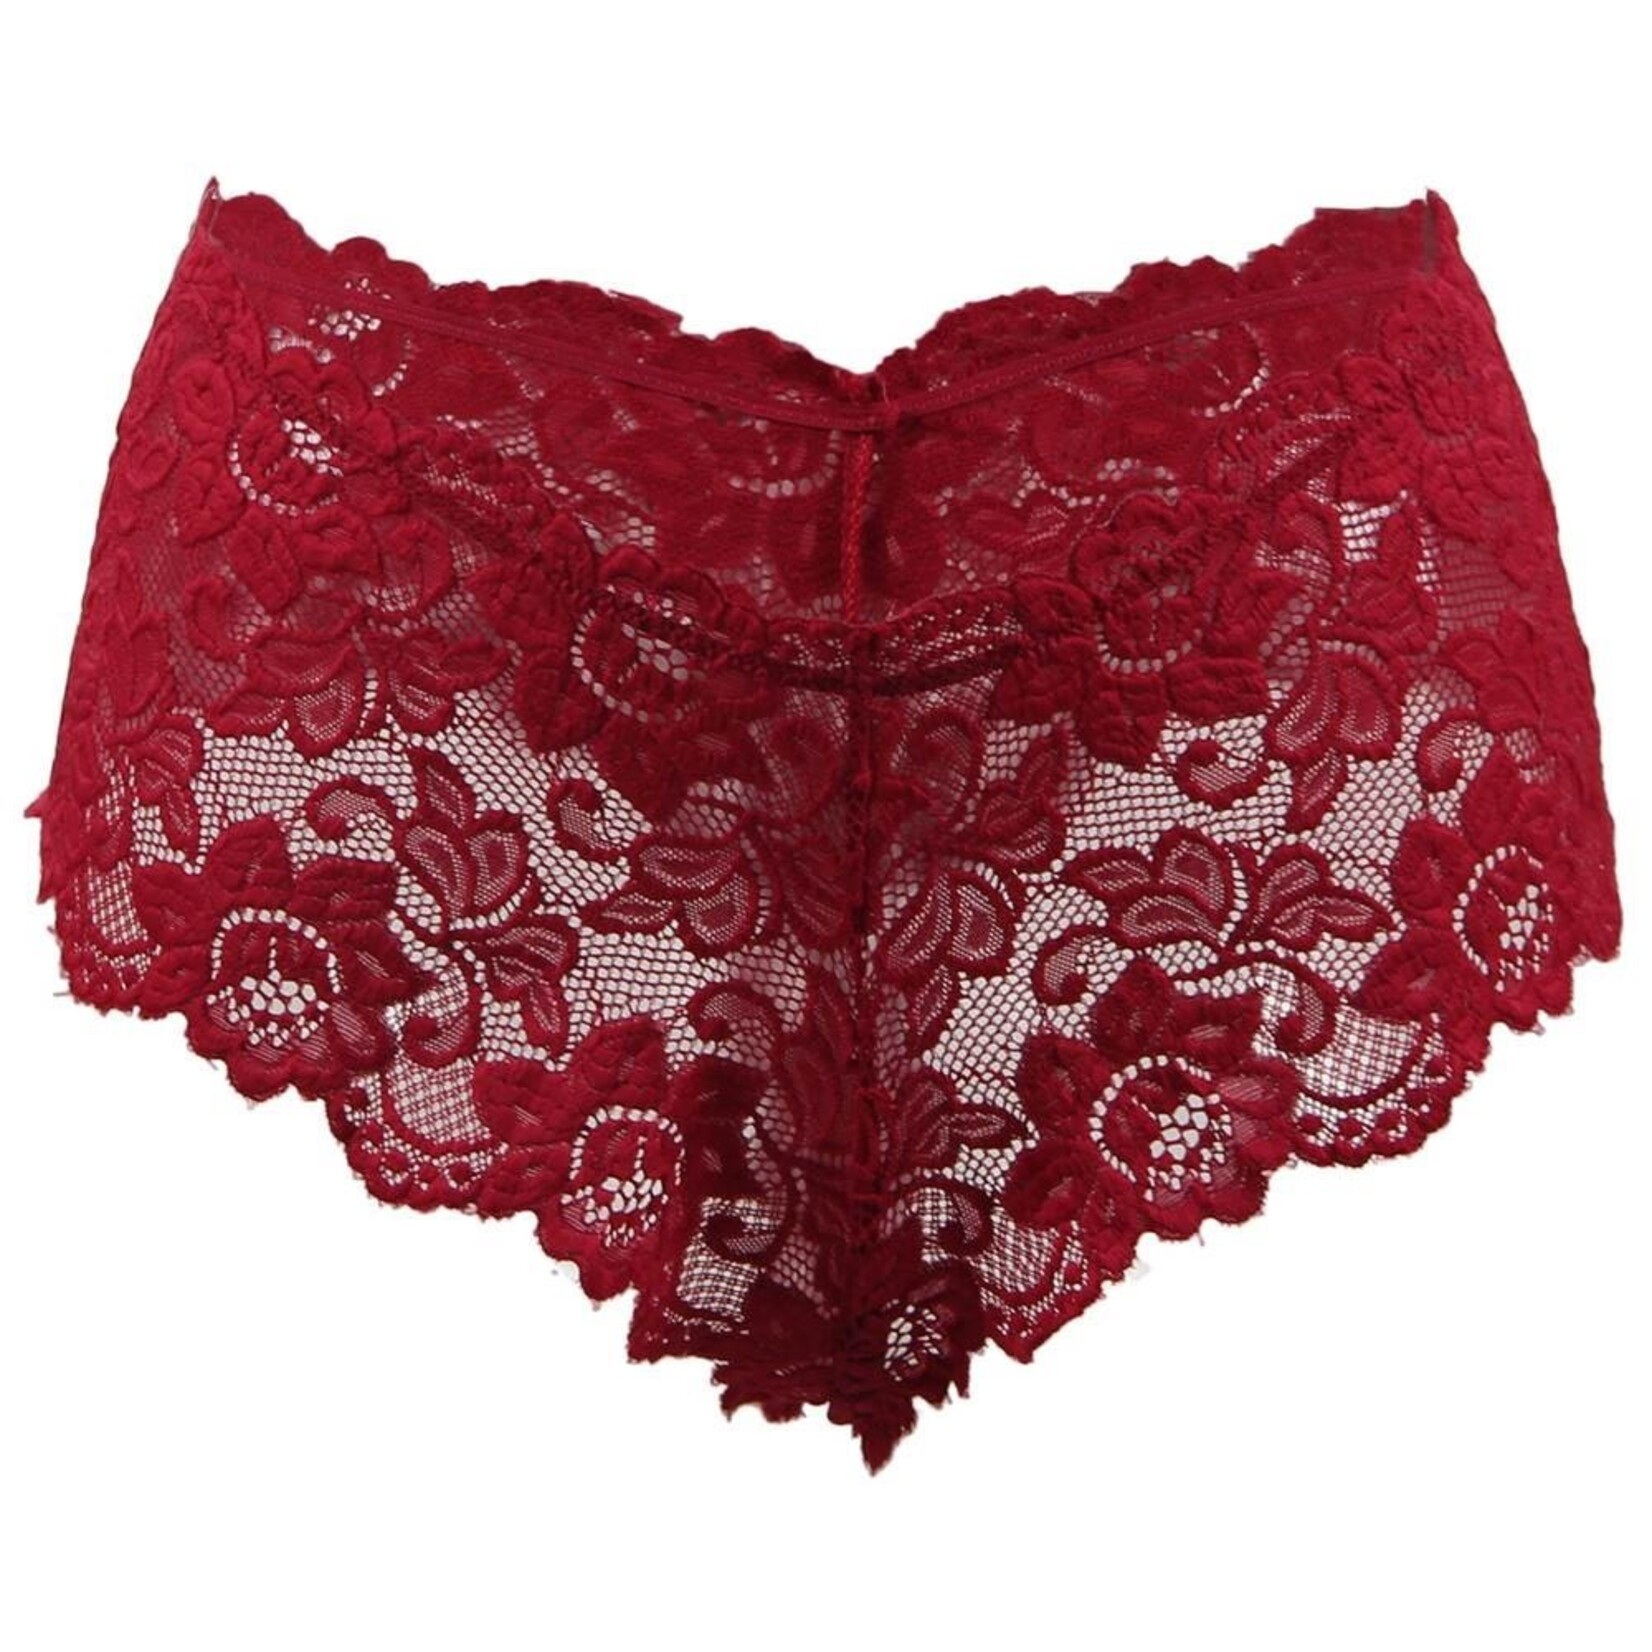 OH YEAH! -  RED SEXY FLORAL LACE PANTY 2XL